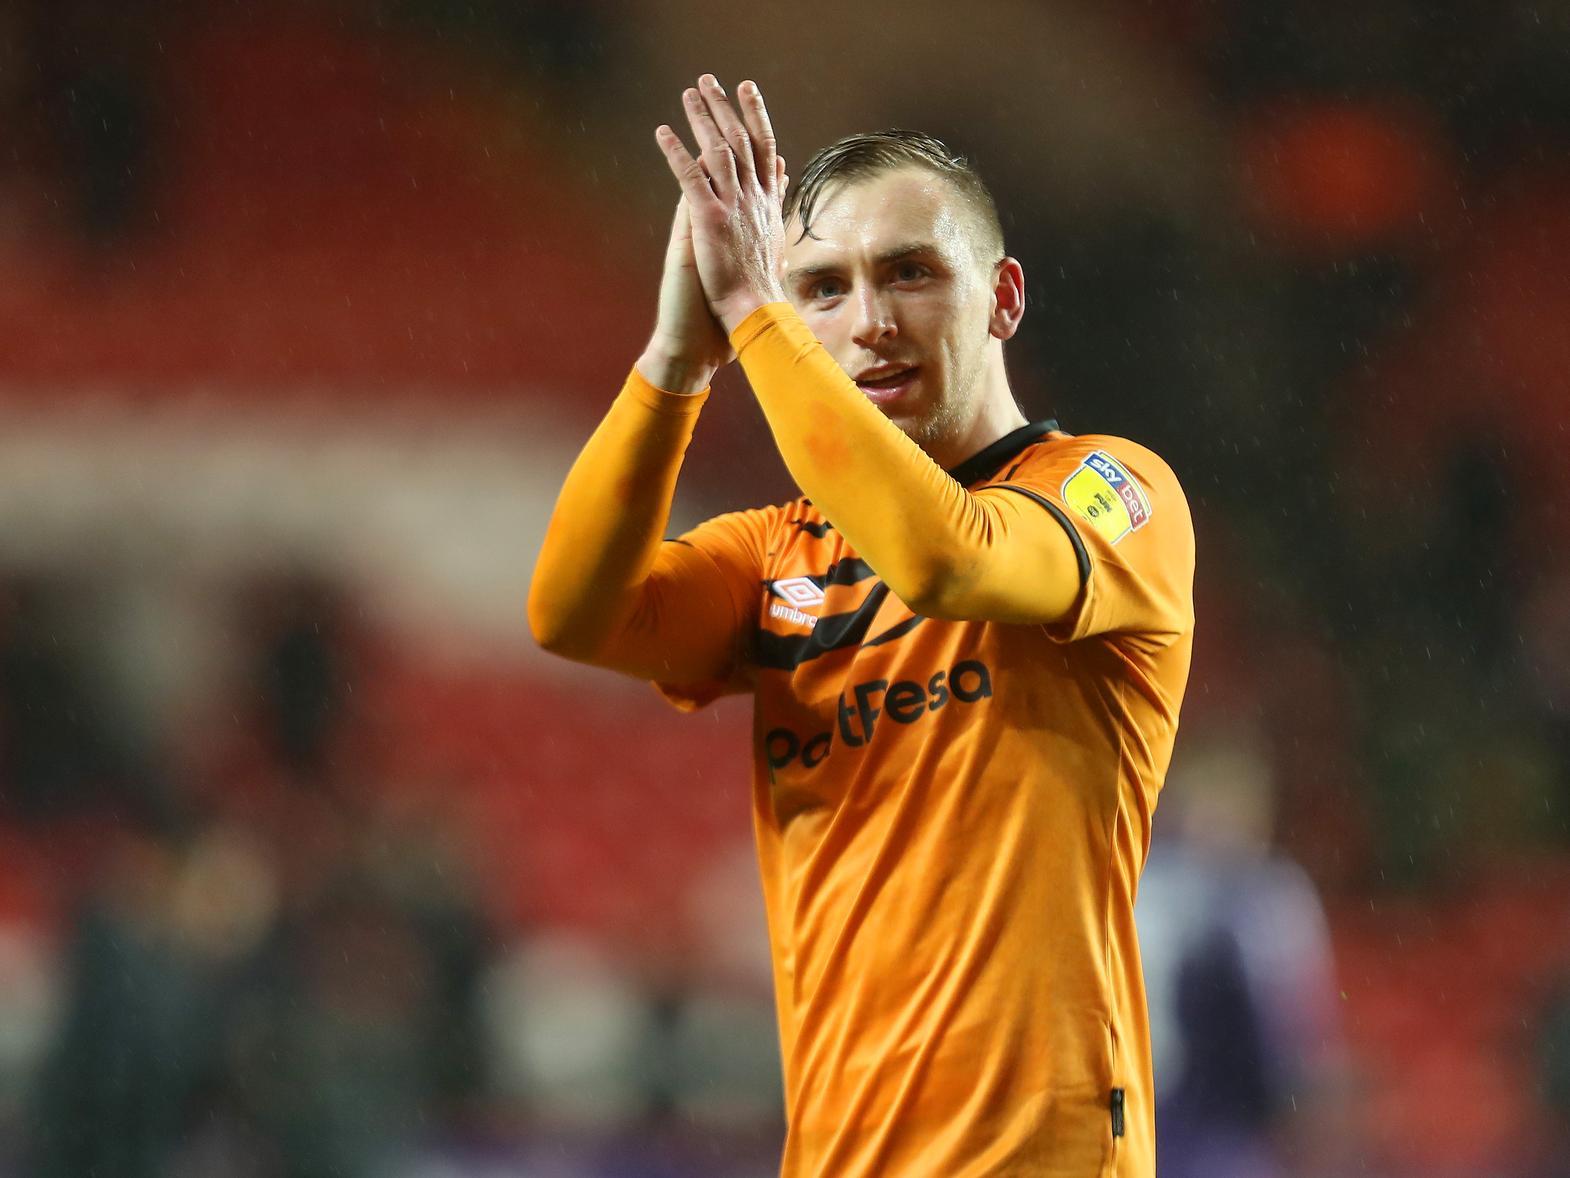 Newcastle United's chances of signing 15m rated Hull City striker Jarrod Bowen have increased. Peter Chapman - Steve Bruce's long-time associate - is reportedly set to represent the player during transfer talks. (Daily Mail)